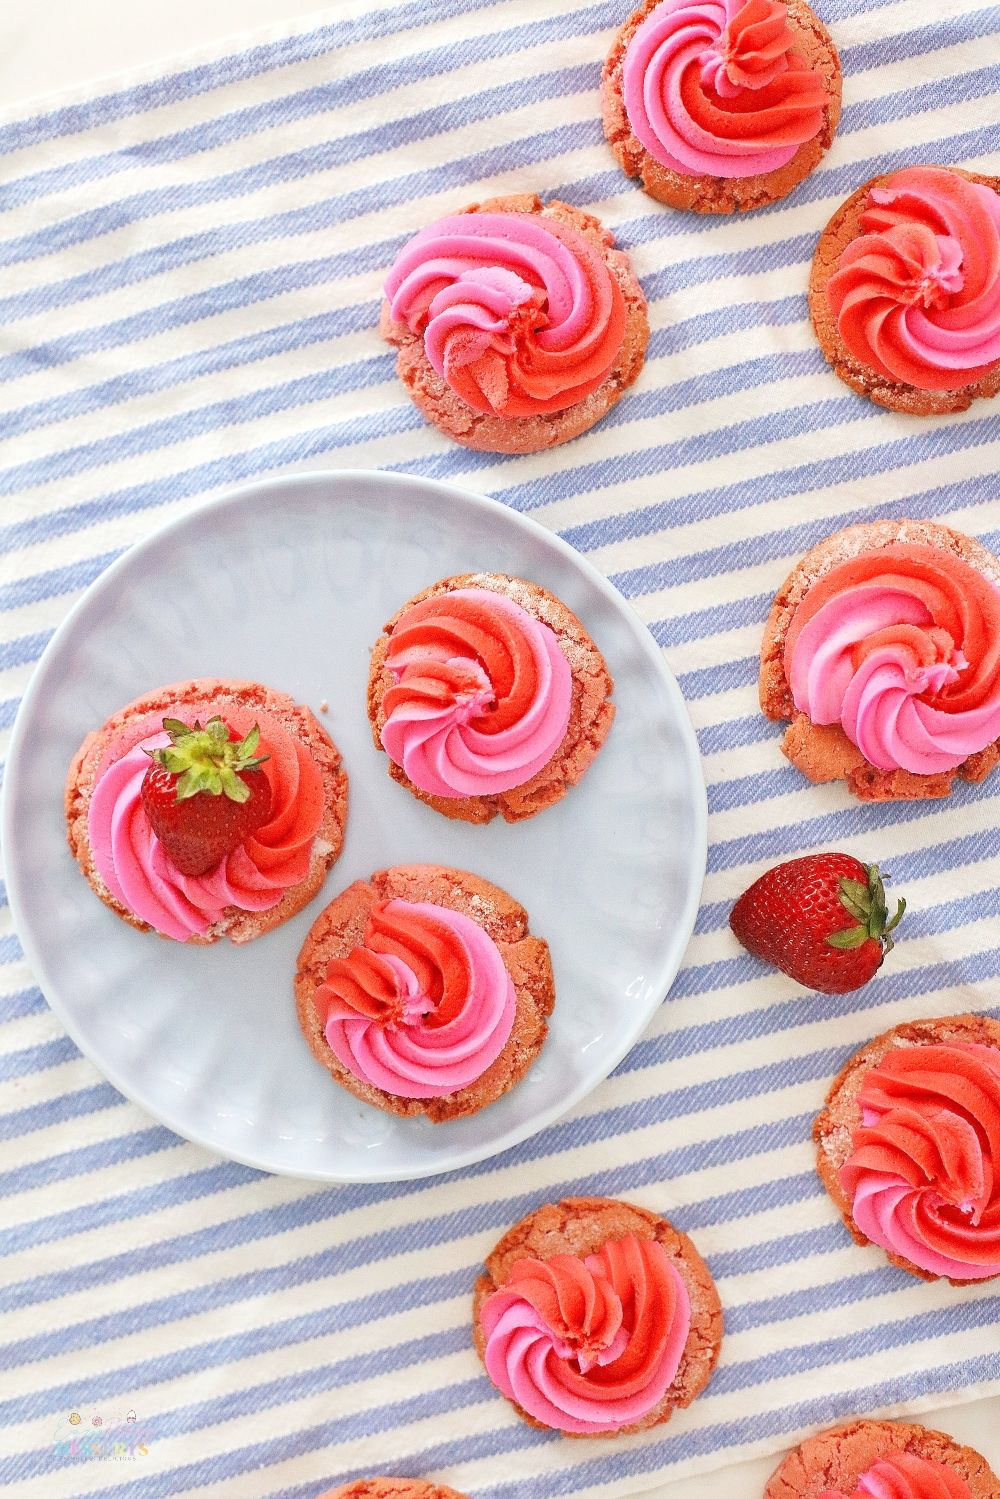 Image of strawberry and cream cookies decorated with fresh strawberries, on a kitchen napkin